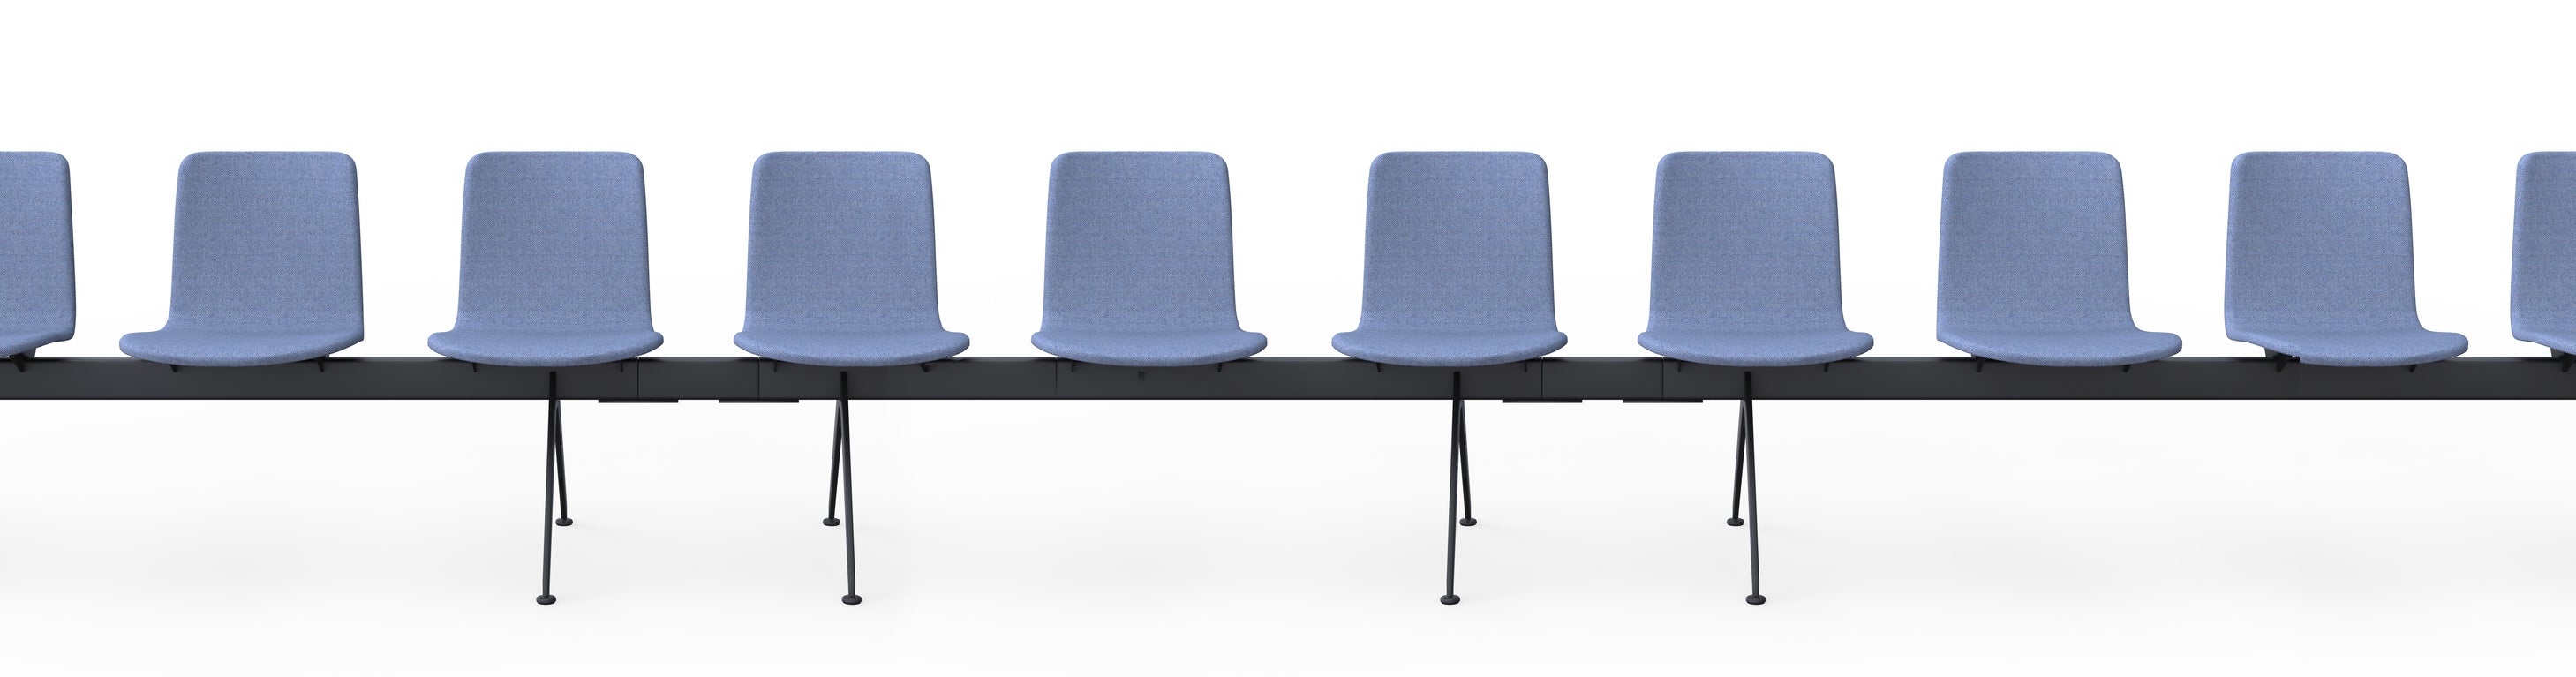 Martela Sola Beam Connected Seating Chair